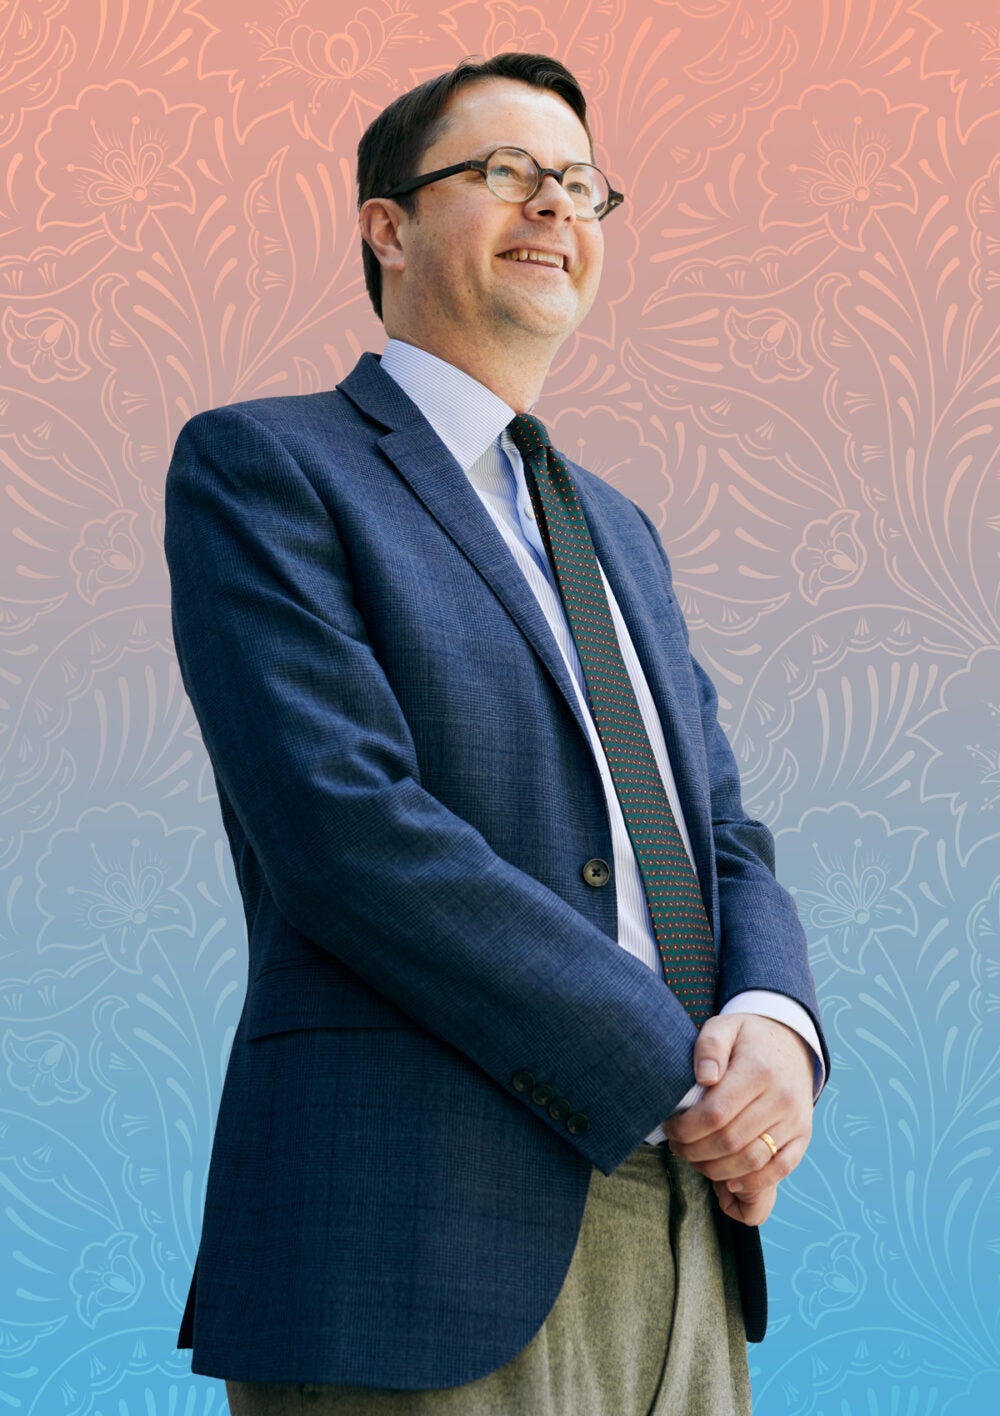 Tyler VanderWeele in khaki pants, a blue blazer, white shirt and tie with his hands clasped and smiling off into the distance. He stands in front of a paisley patterned background, colored from pink to blue.